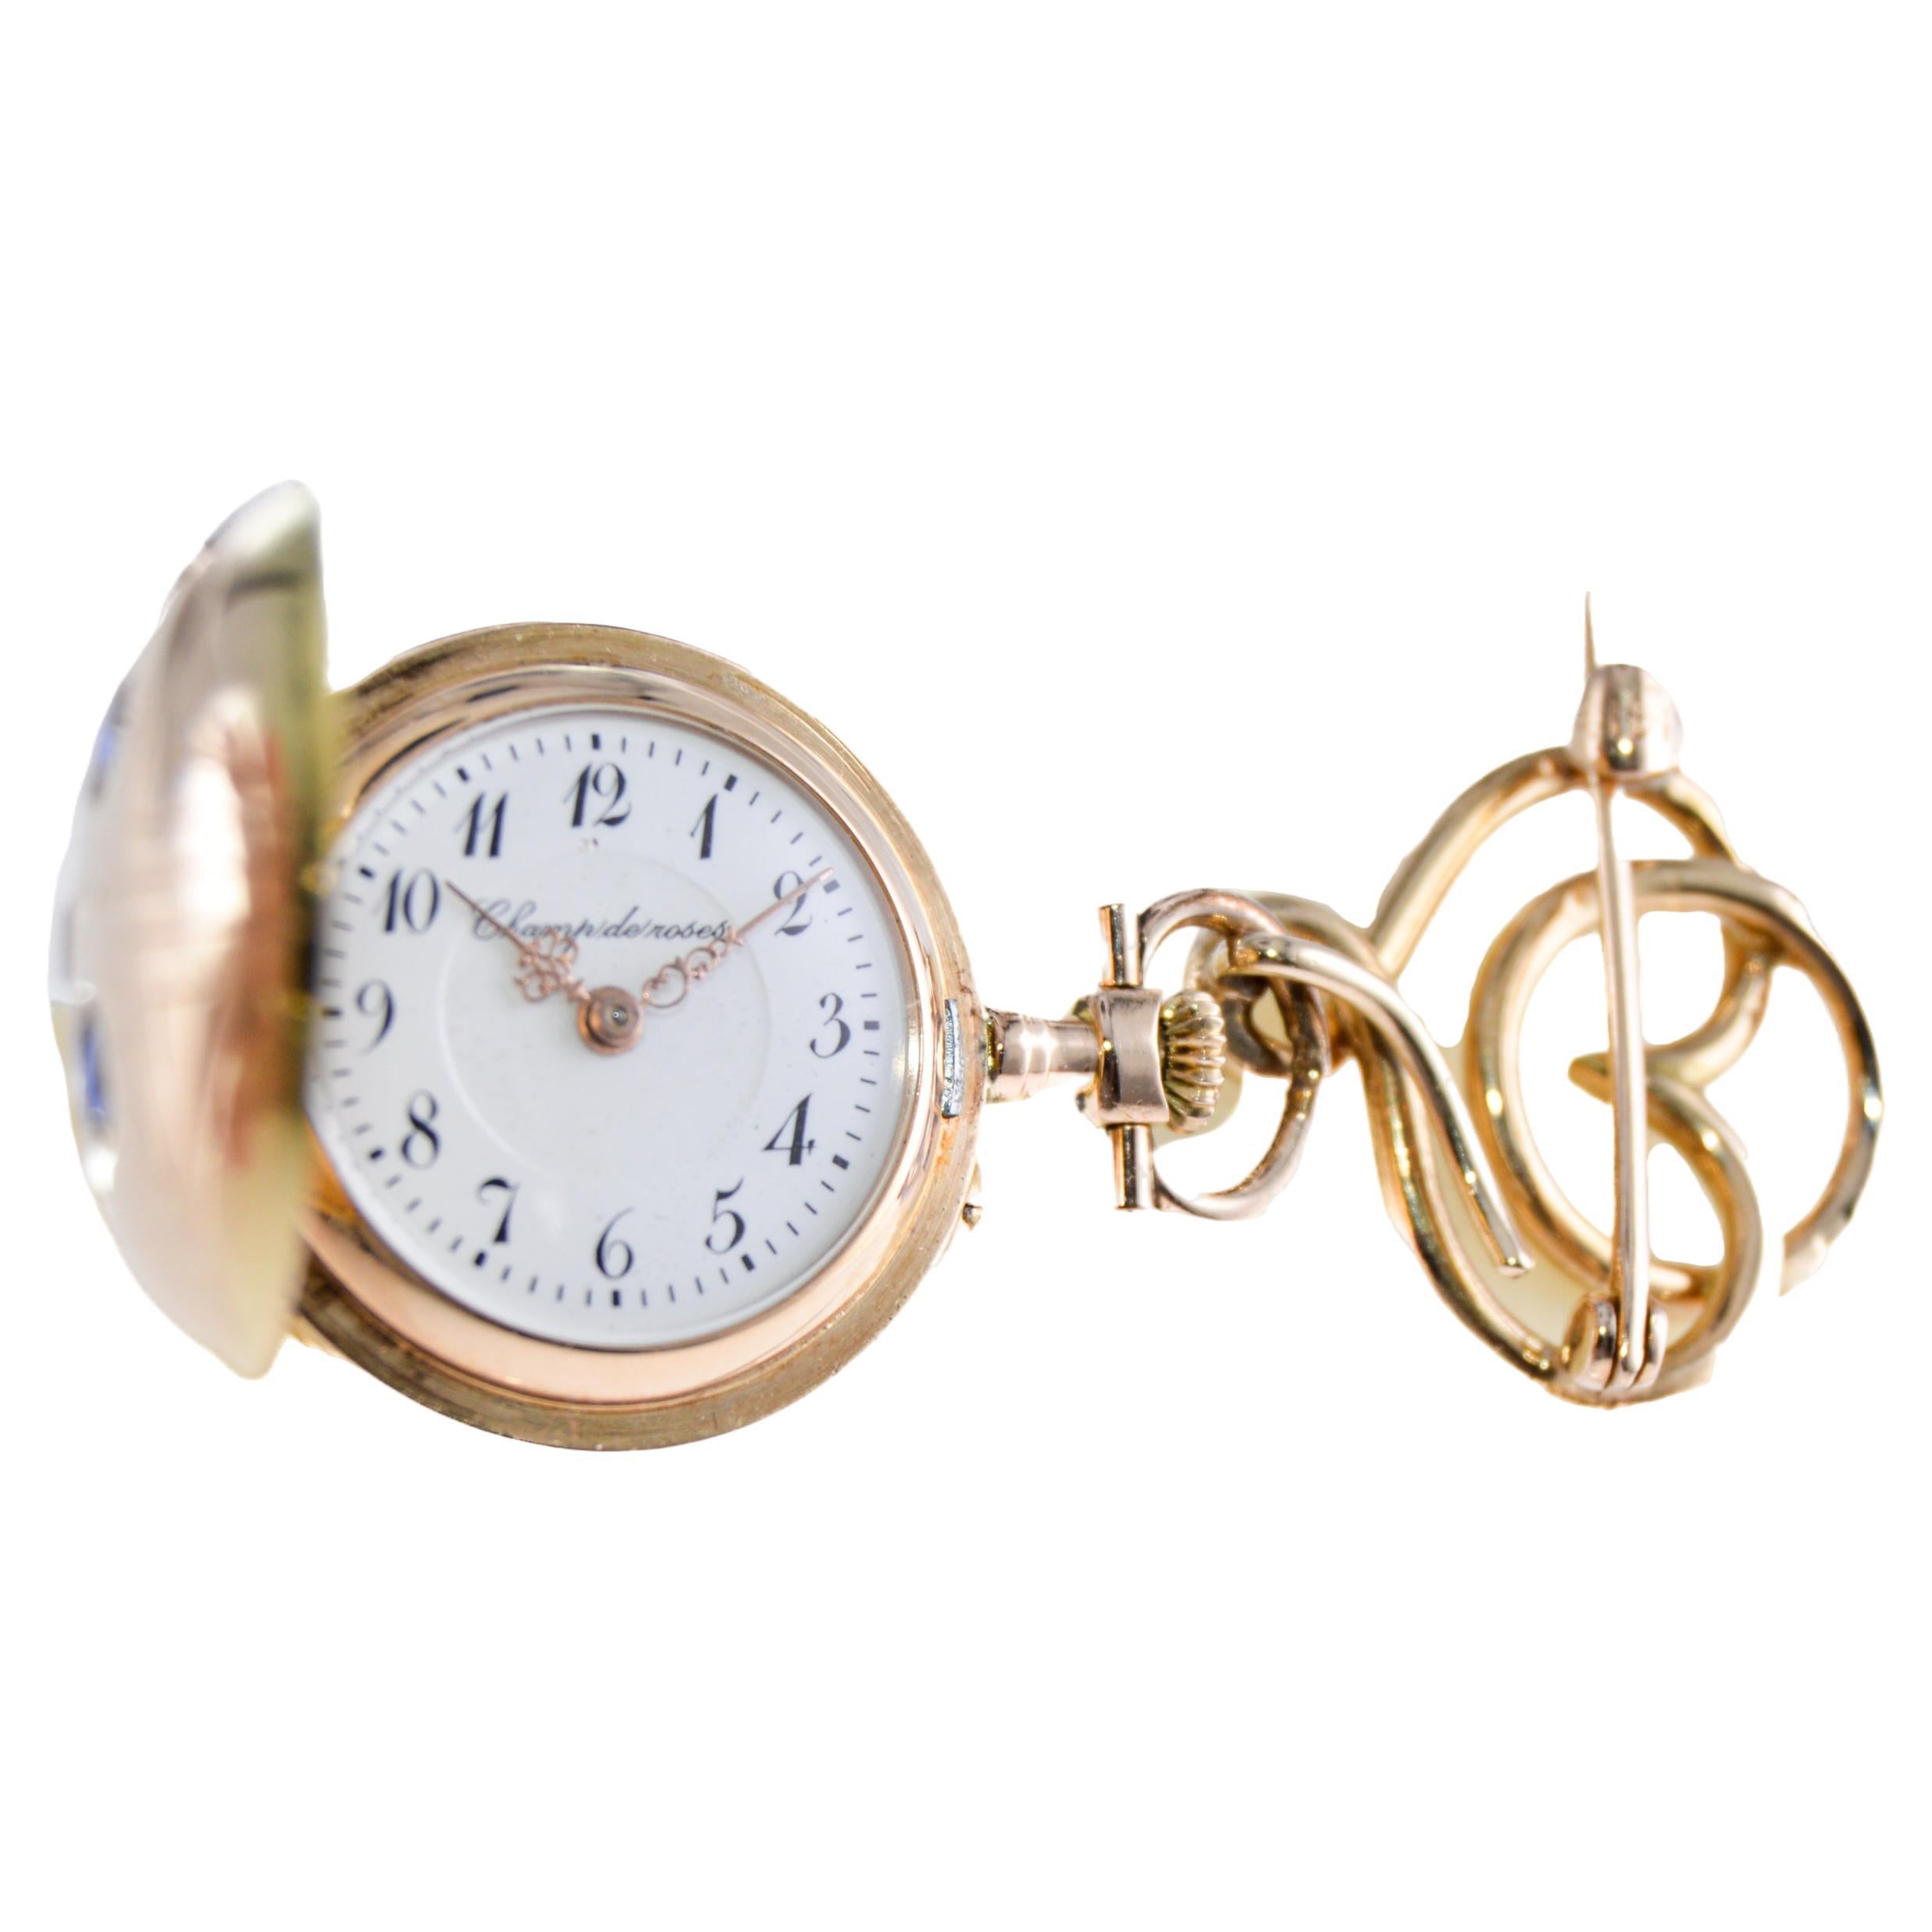 Women's Champ de Roses 14Kt. Solid Gold Pendant Watch from 1900's